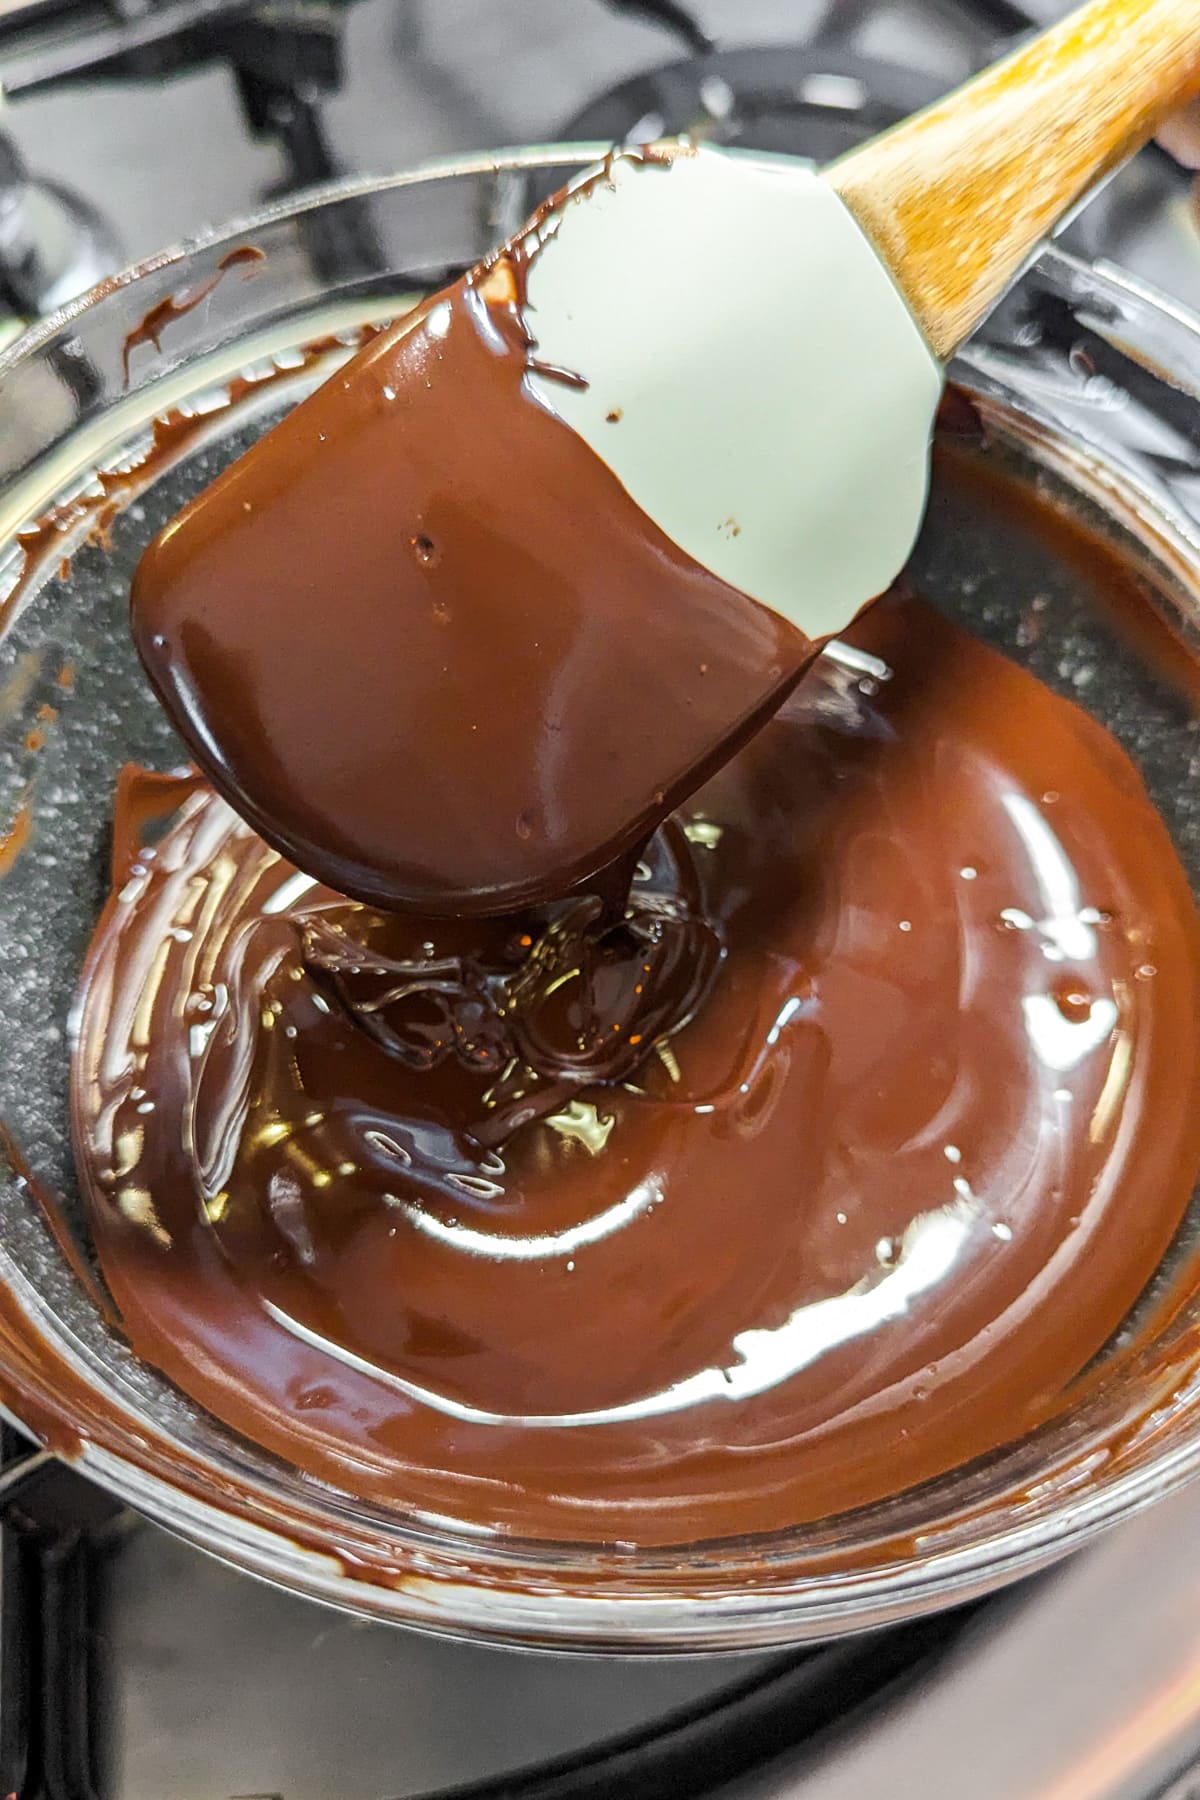 Melting chocolate in a transparent bowl on the stove.